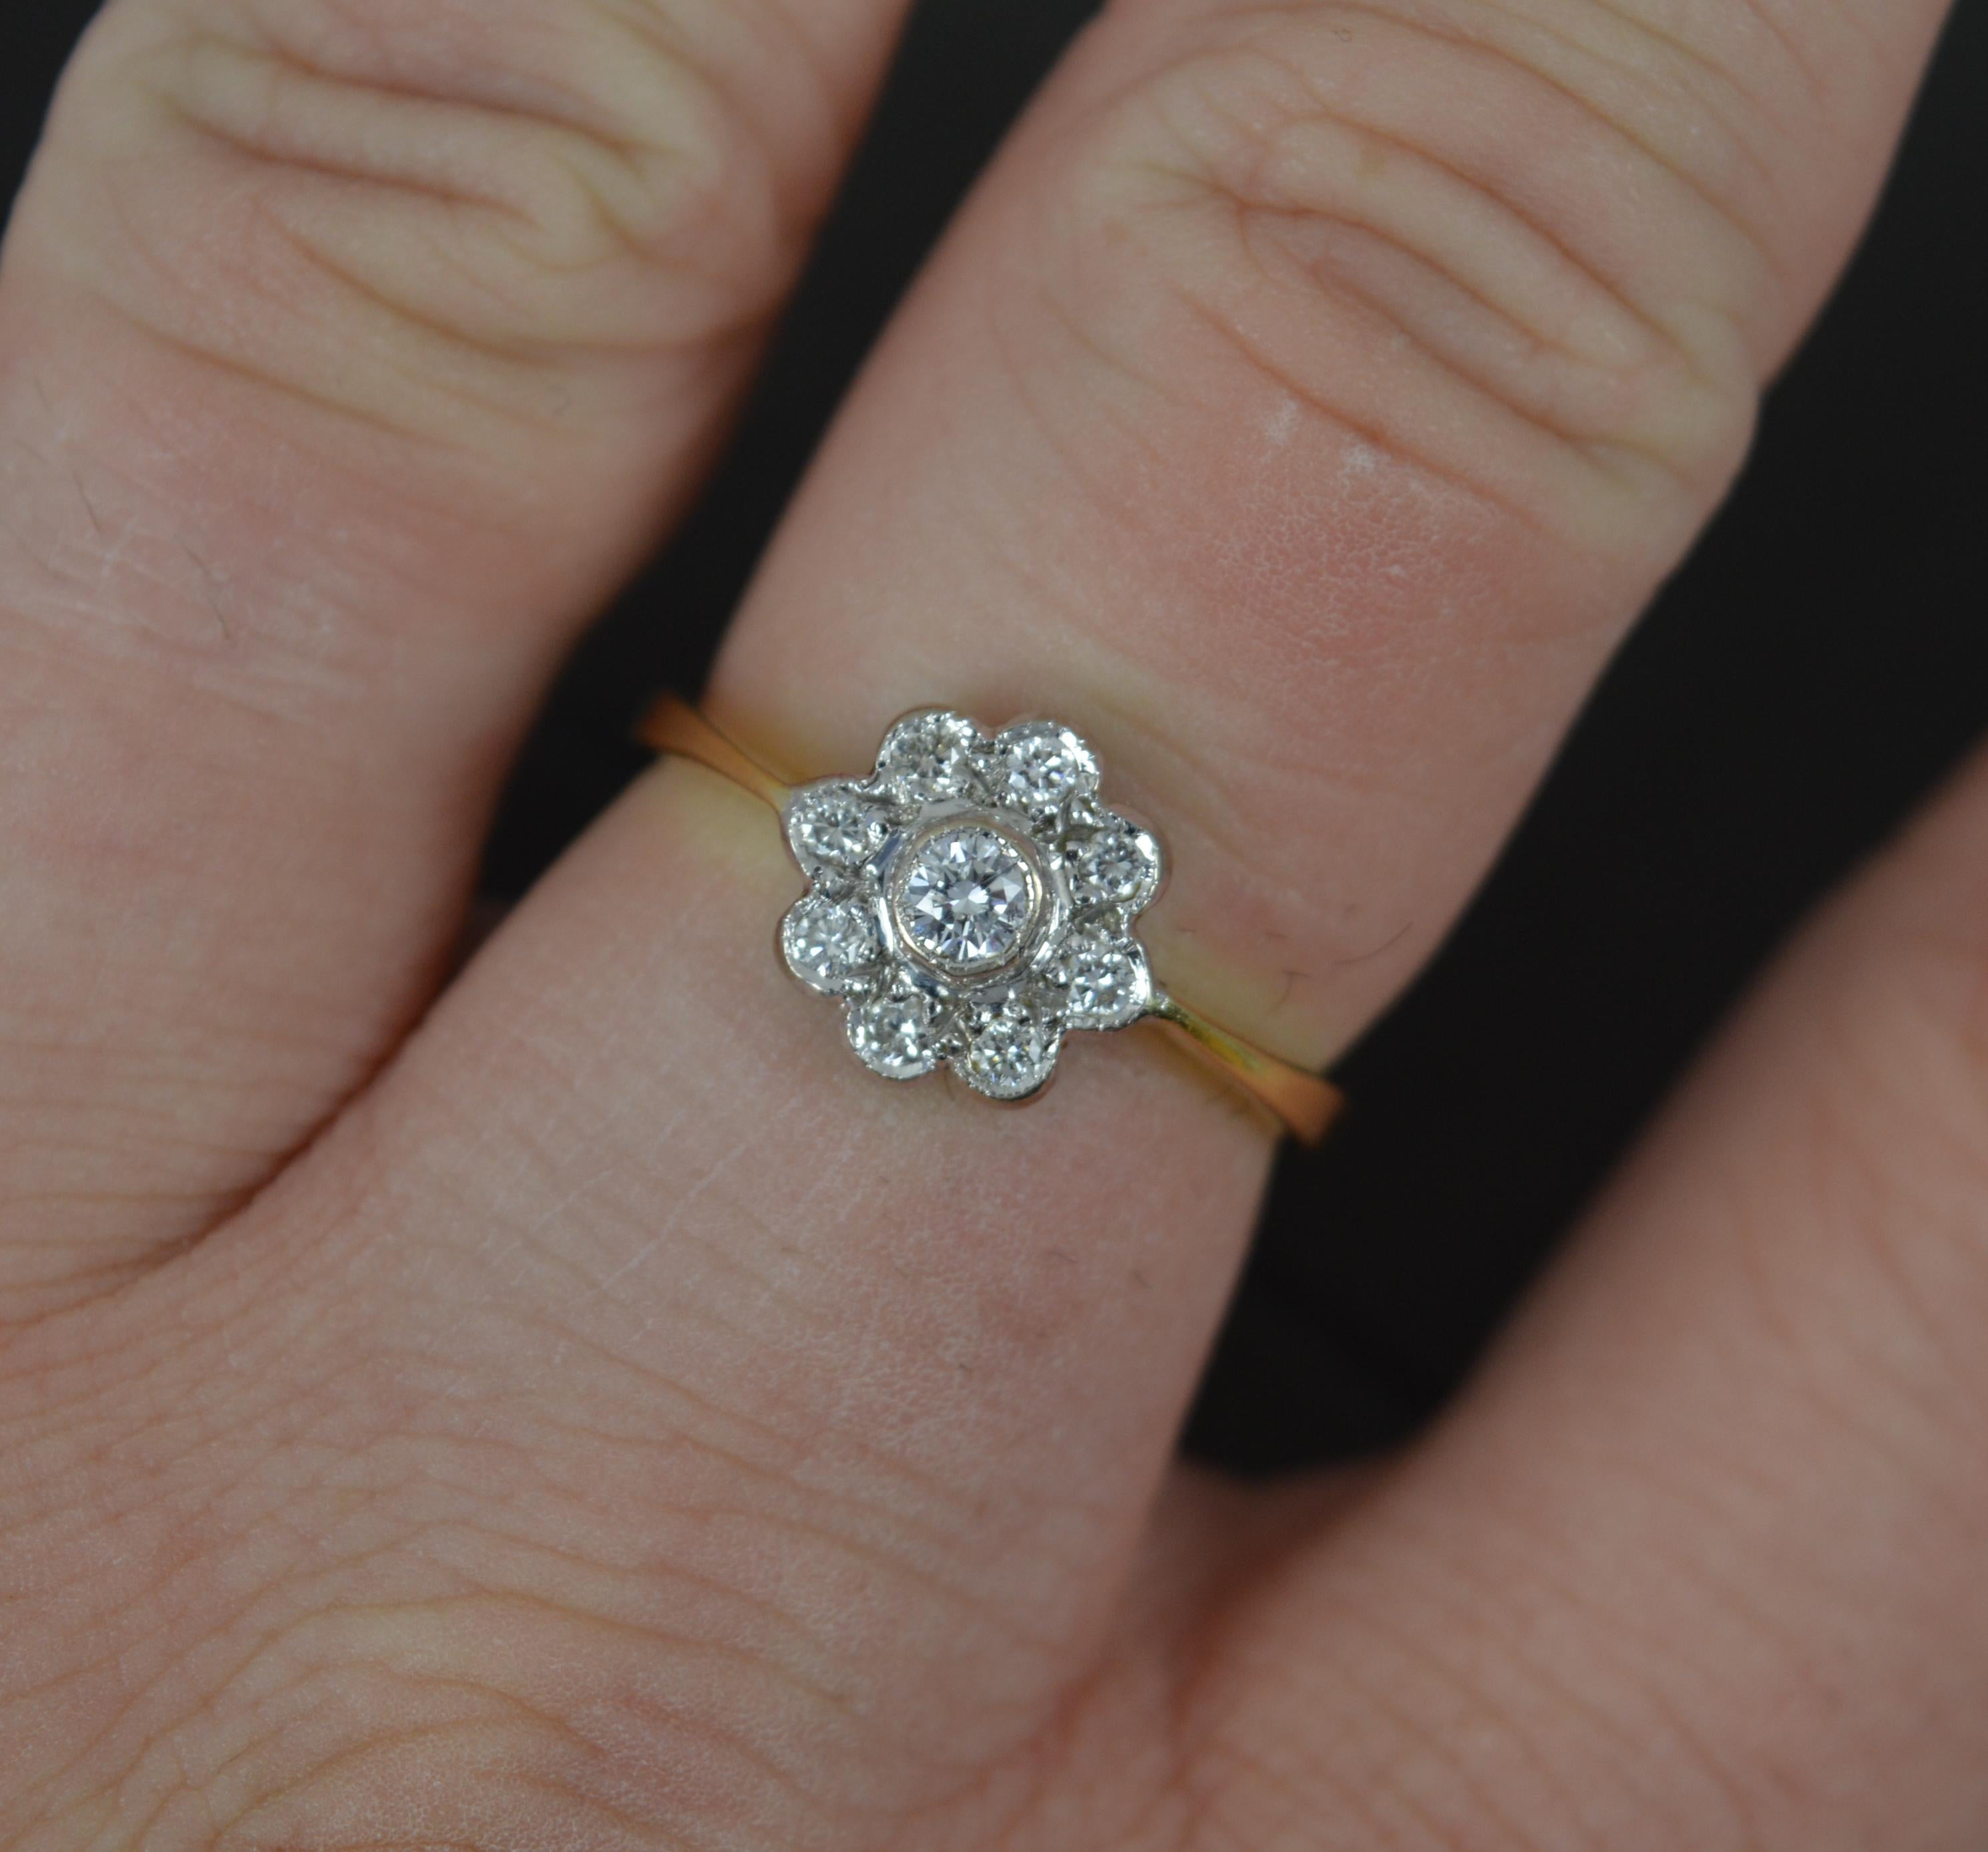 A superb 18ct gold and diamond ring.
18 carat yellow gold example.
Designed with nine natural round brilliant cut diamonds in full grain bezel settings. Clean, white and sparkly diamonds.
9.6mm x 9.6mm cluster head. Protruding 4.5mm off the